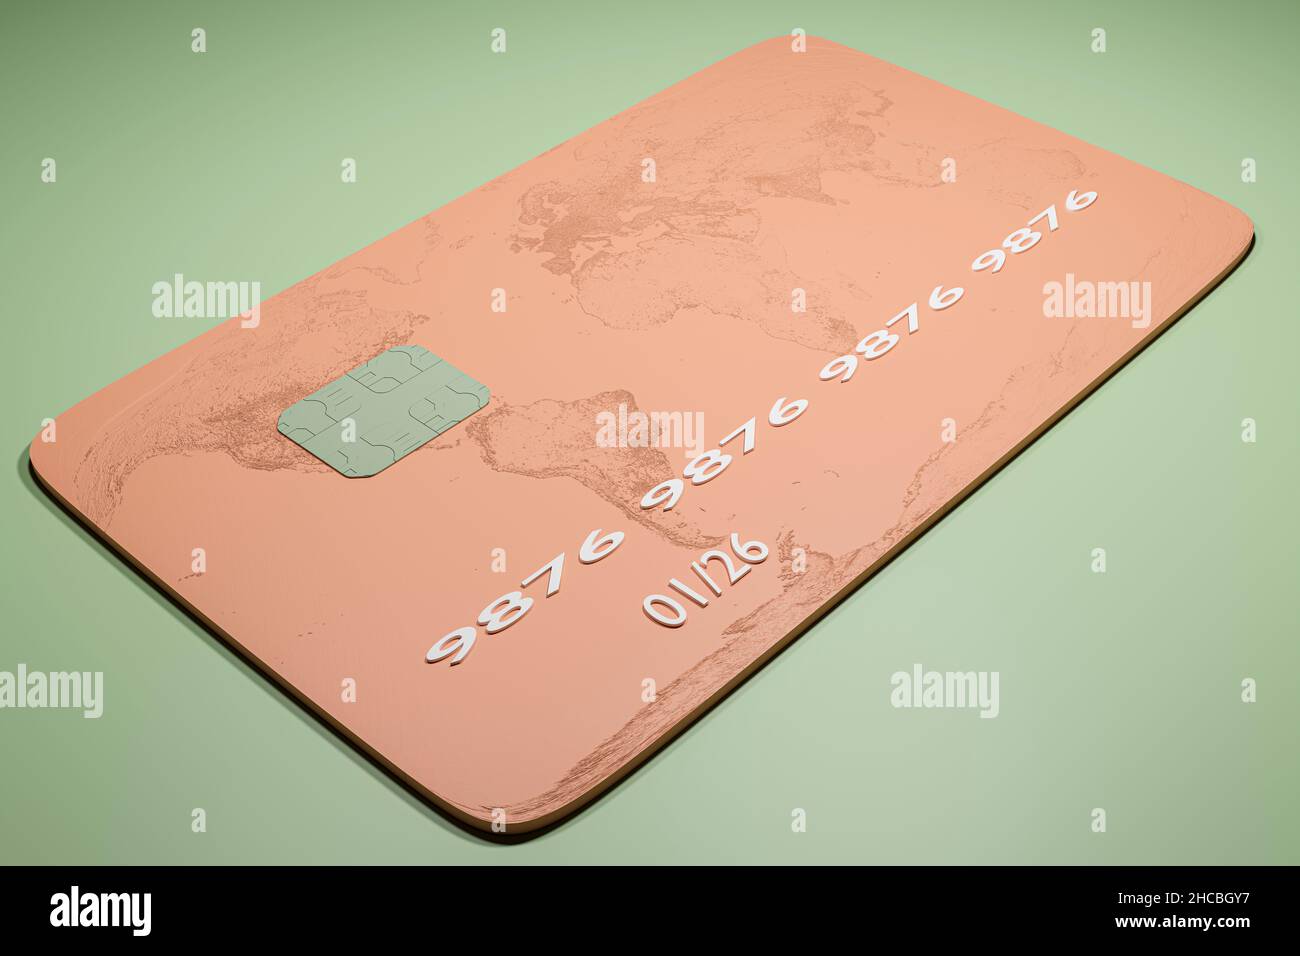 Computer chip and number on credit card over green background Stock Photo